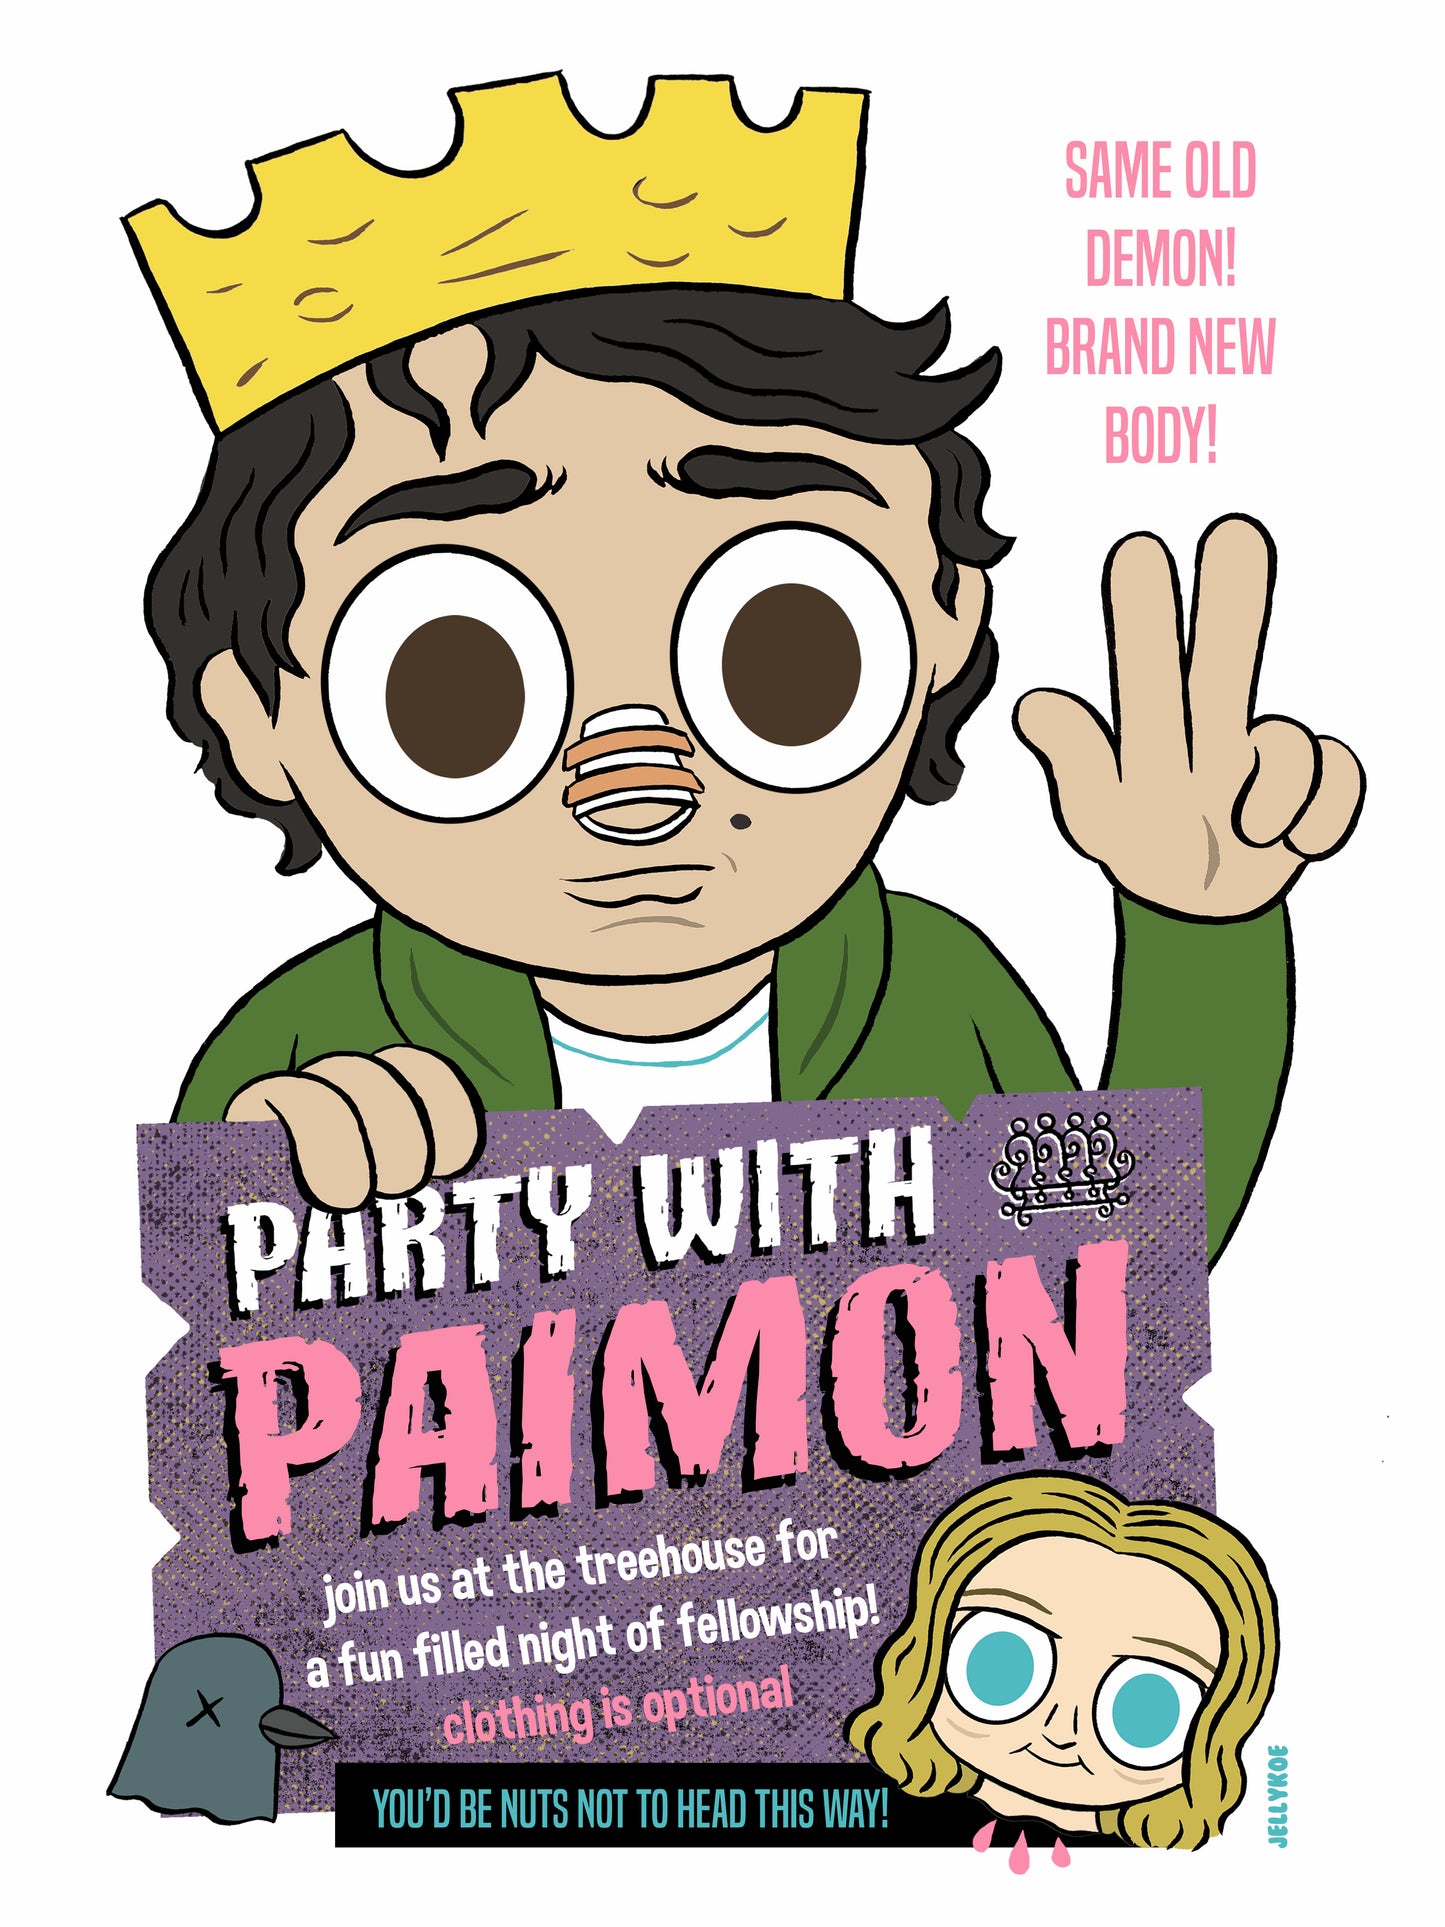 “Party with Paimon" 12 x 16 poster print